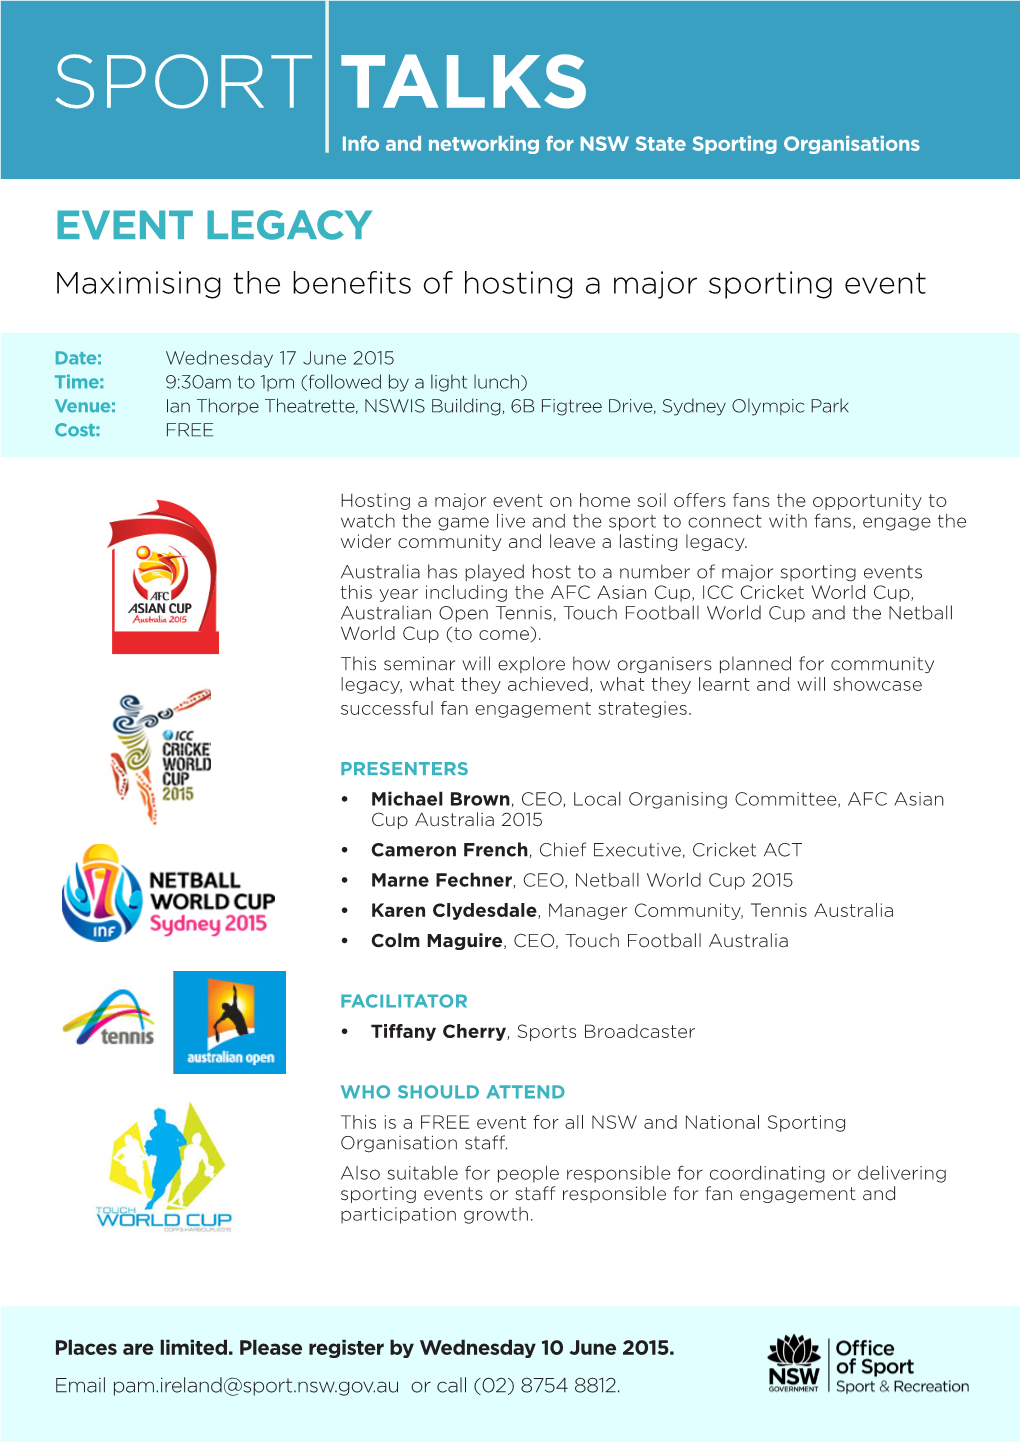 SPORT TALKS Info and Networking for NSW State Sporting Organisations